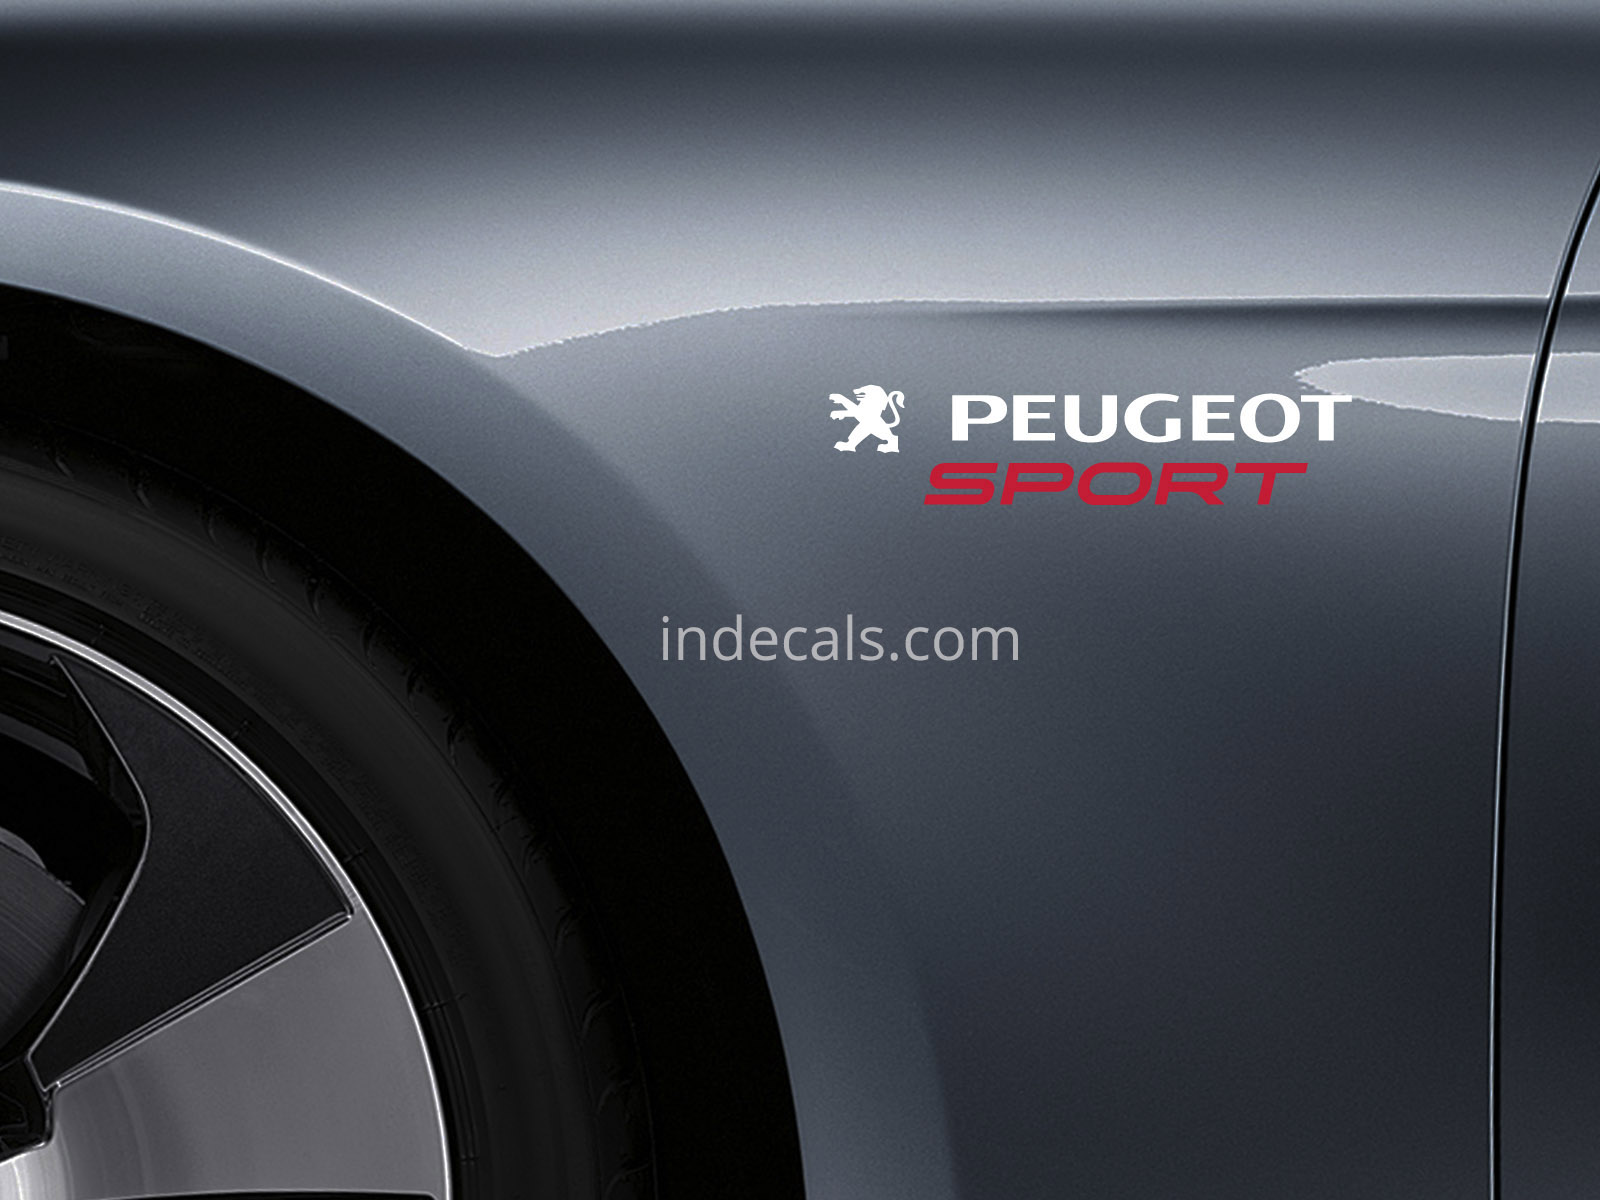 2 x Peugeot Sports Stickers for Wings - White & Red